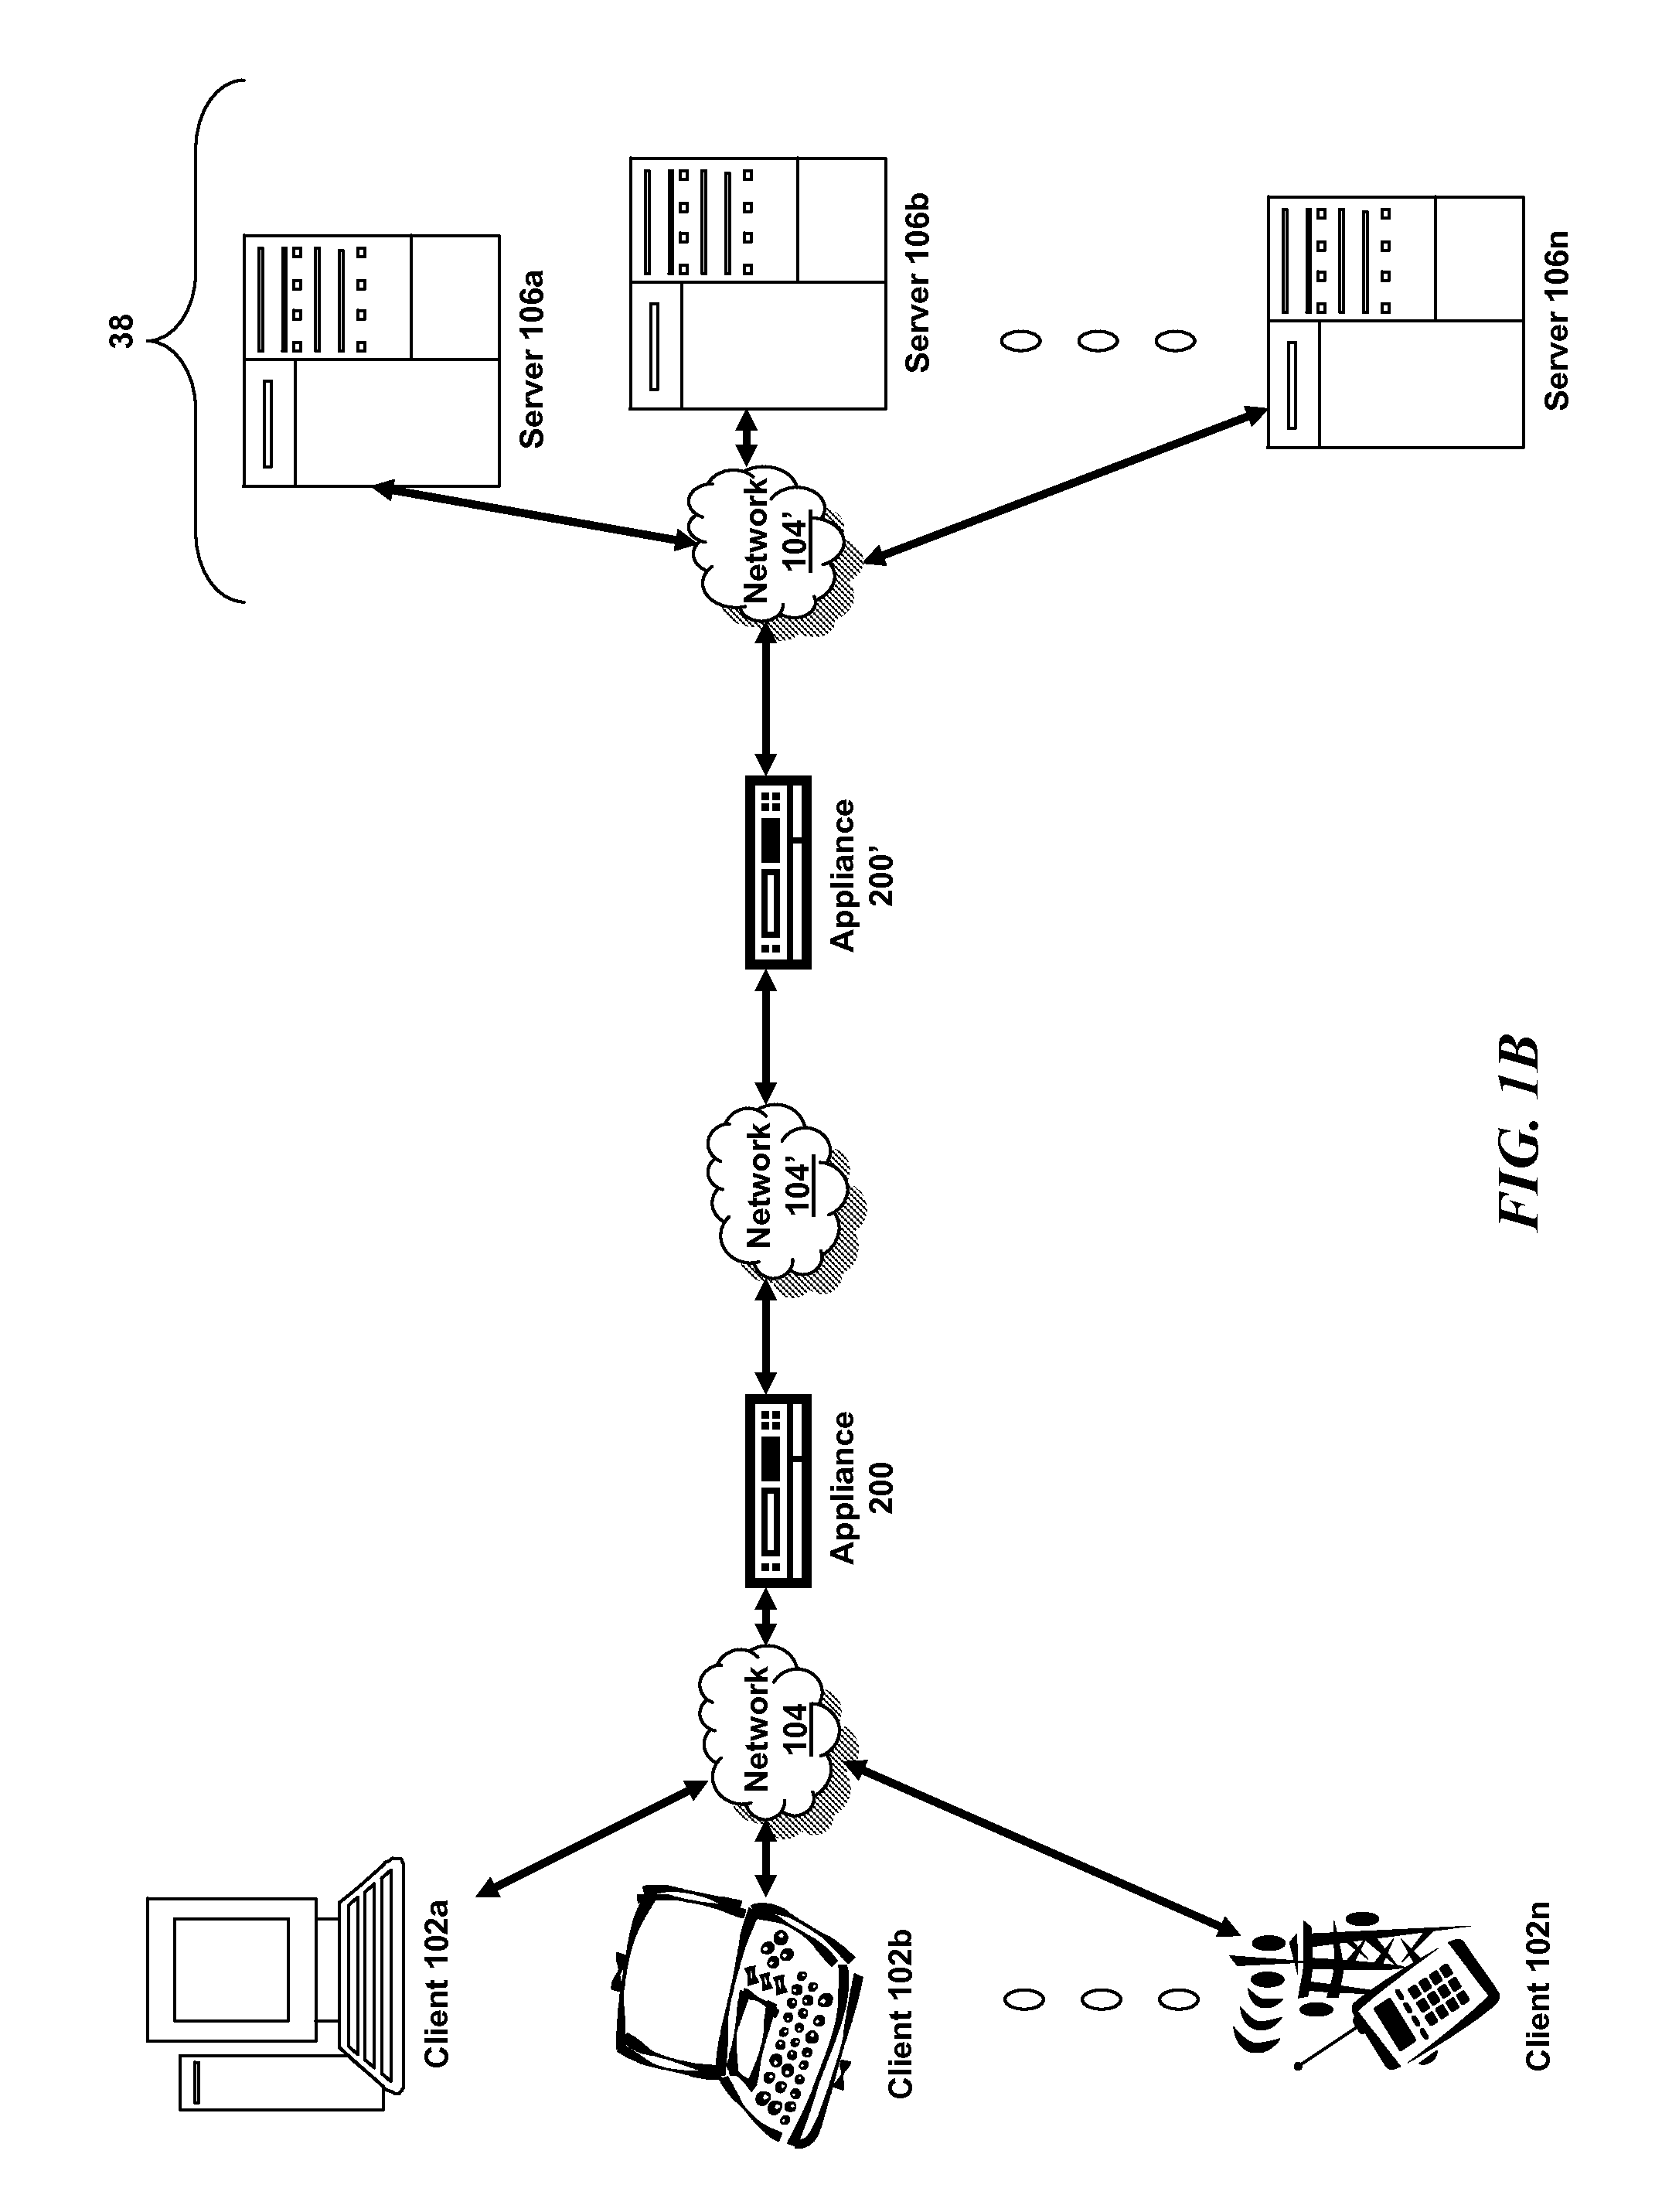 Systems and methods for server initiated connection management in a multi-core system